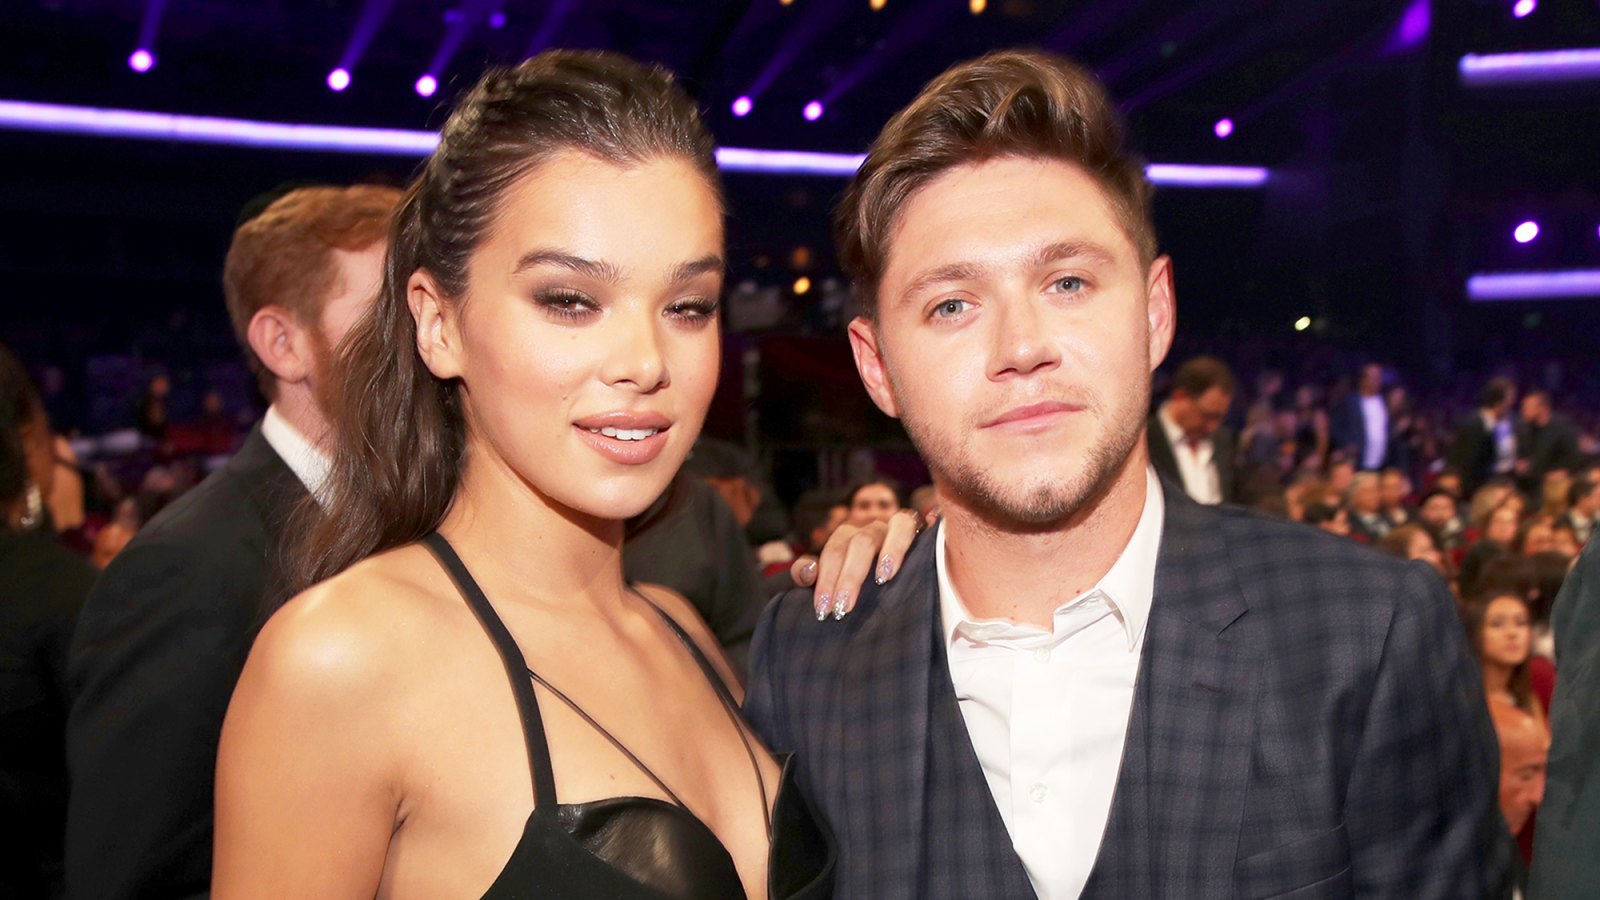 Hailee Steinfeld and Niall Horan during the 2017 American Music Awards at Microsoft Theater in Los Angeles, California.